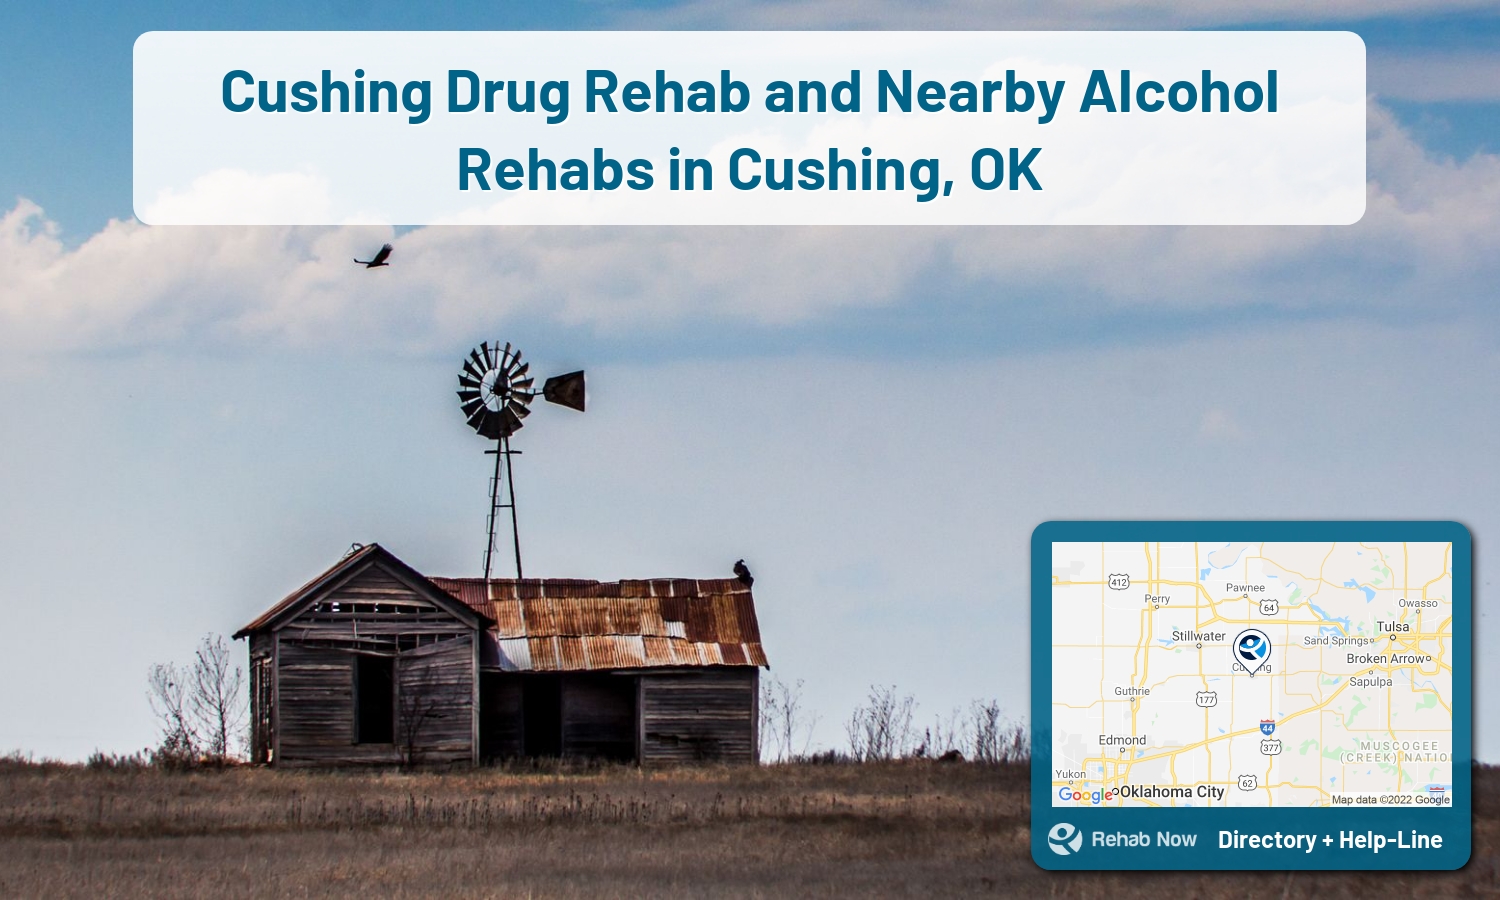 Drug rehab and alcohol treatment services nearby Cushing, OK. Need help choosing a treatment program? Call our free hotline!